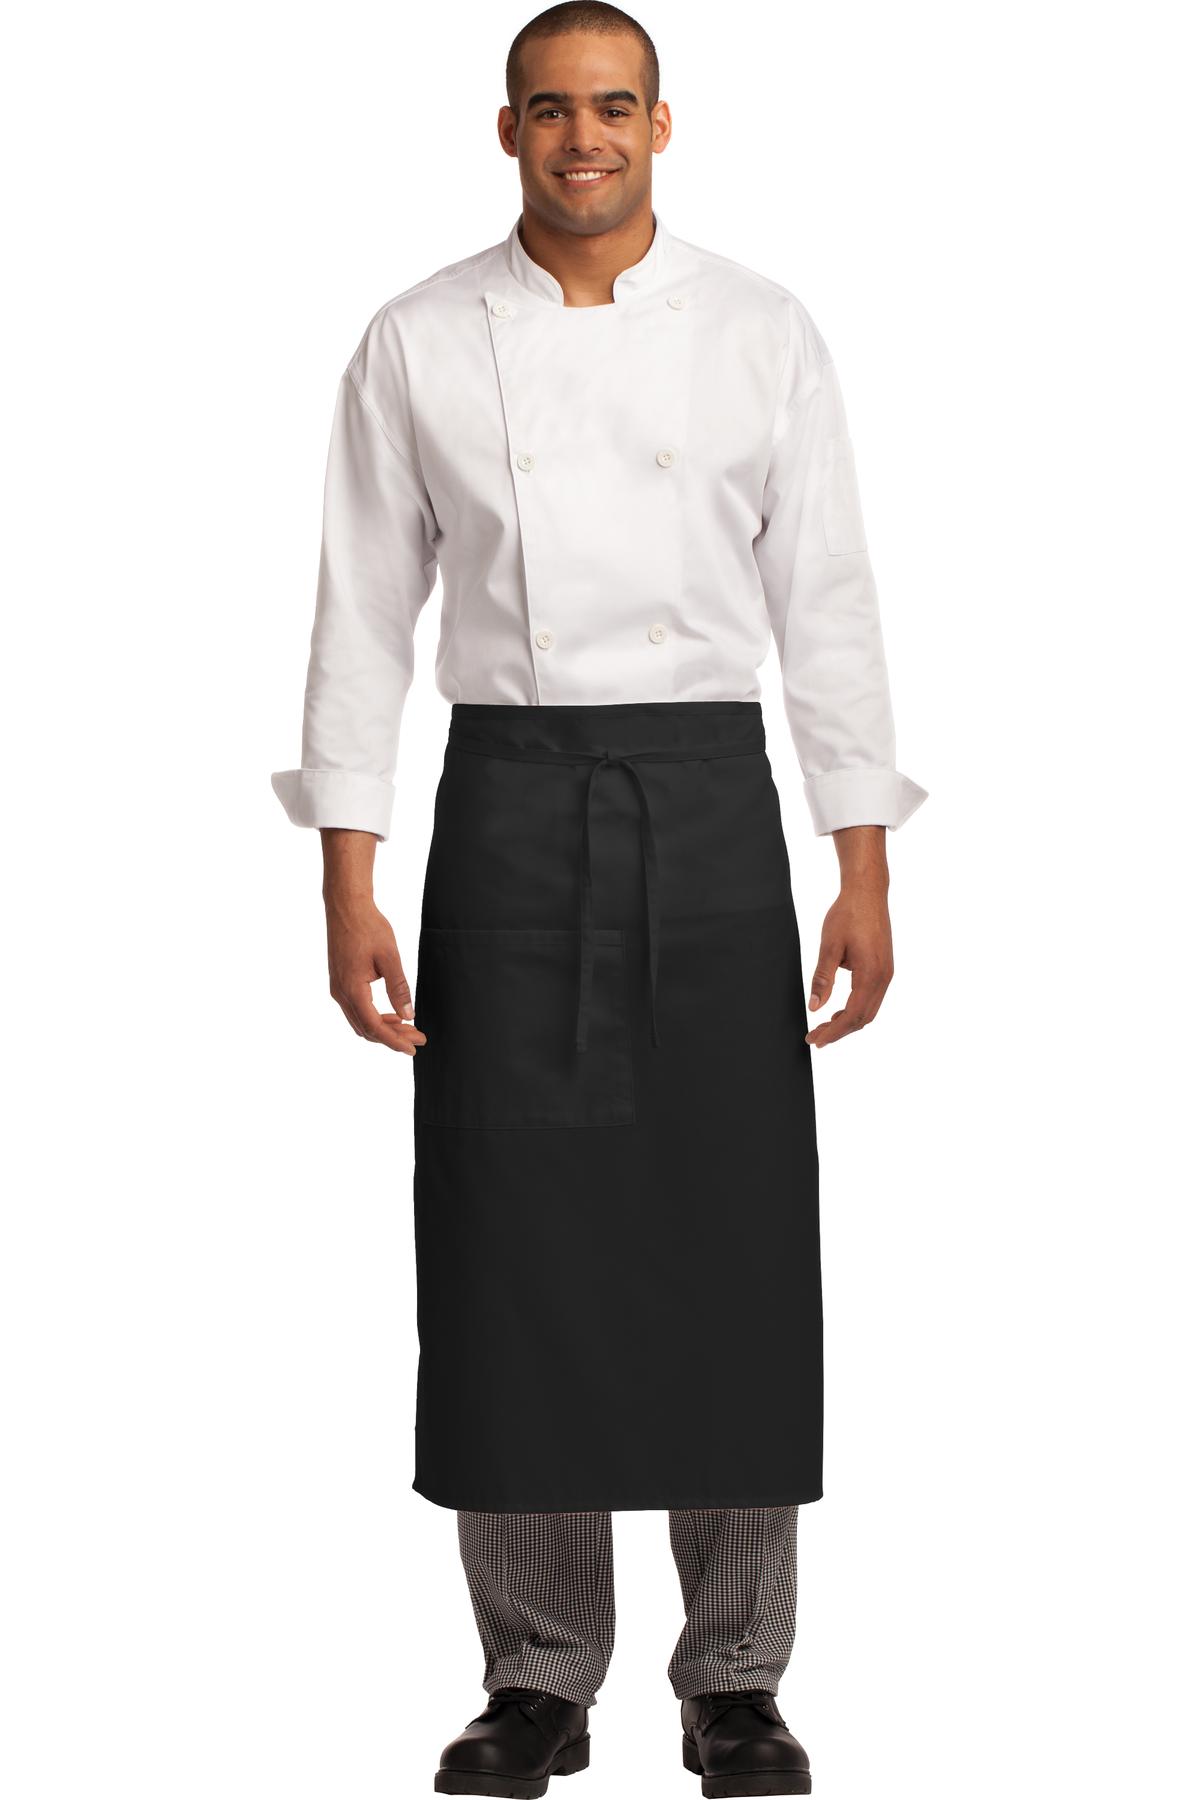 Port Authority Easy Care Full Bistro Apron with Stain...